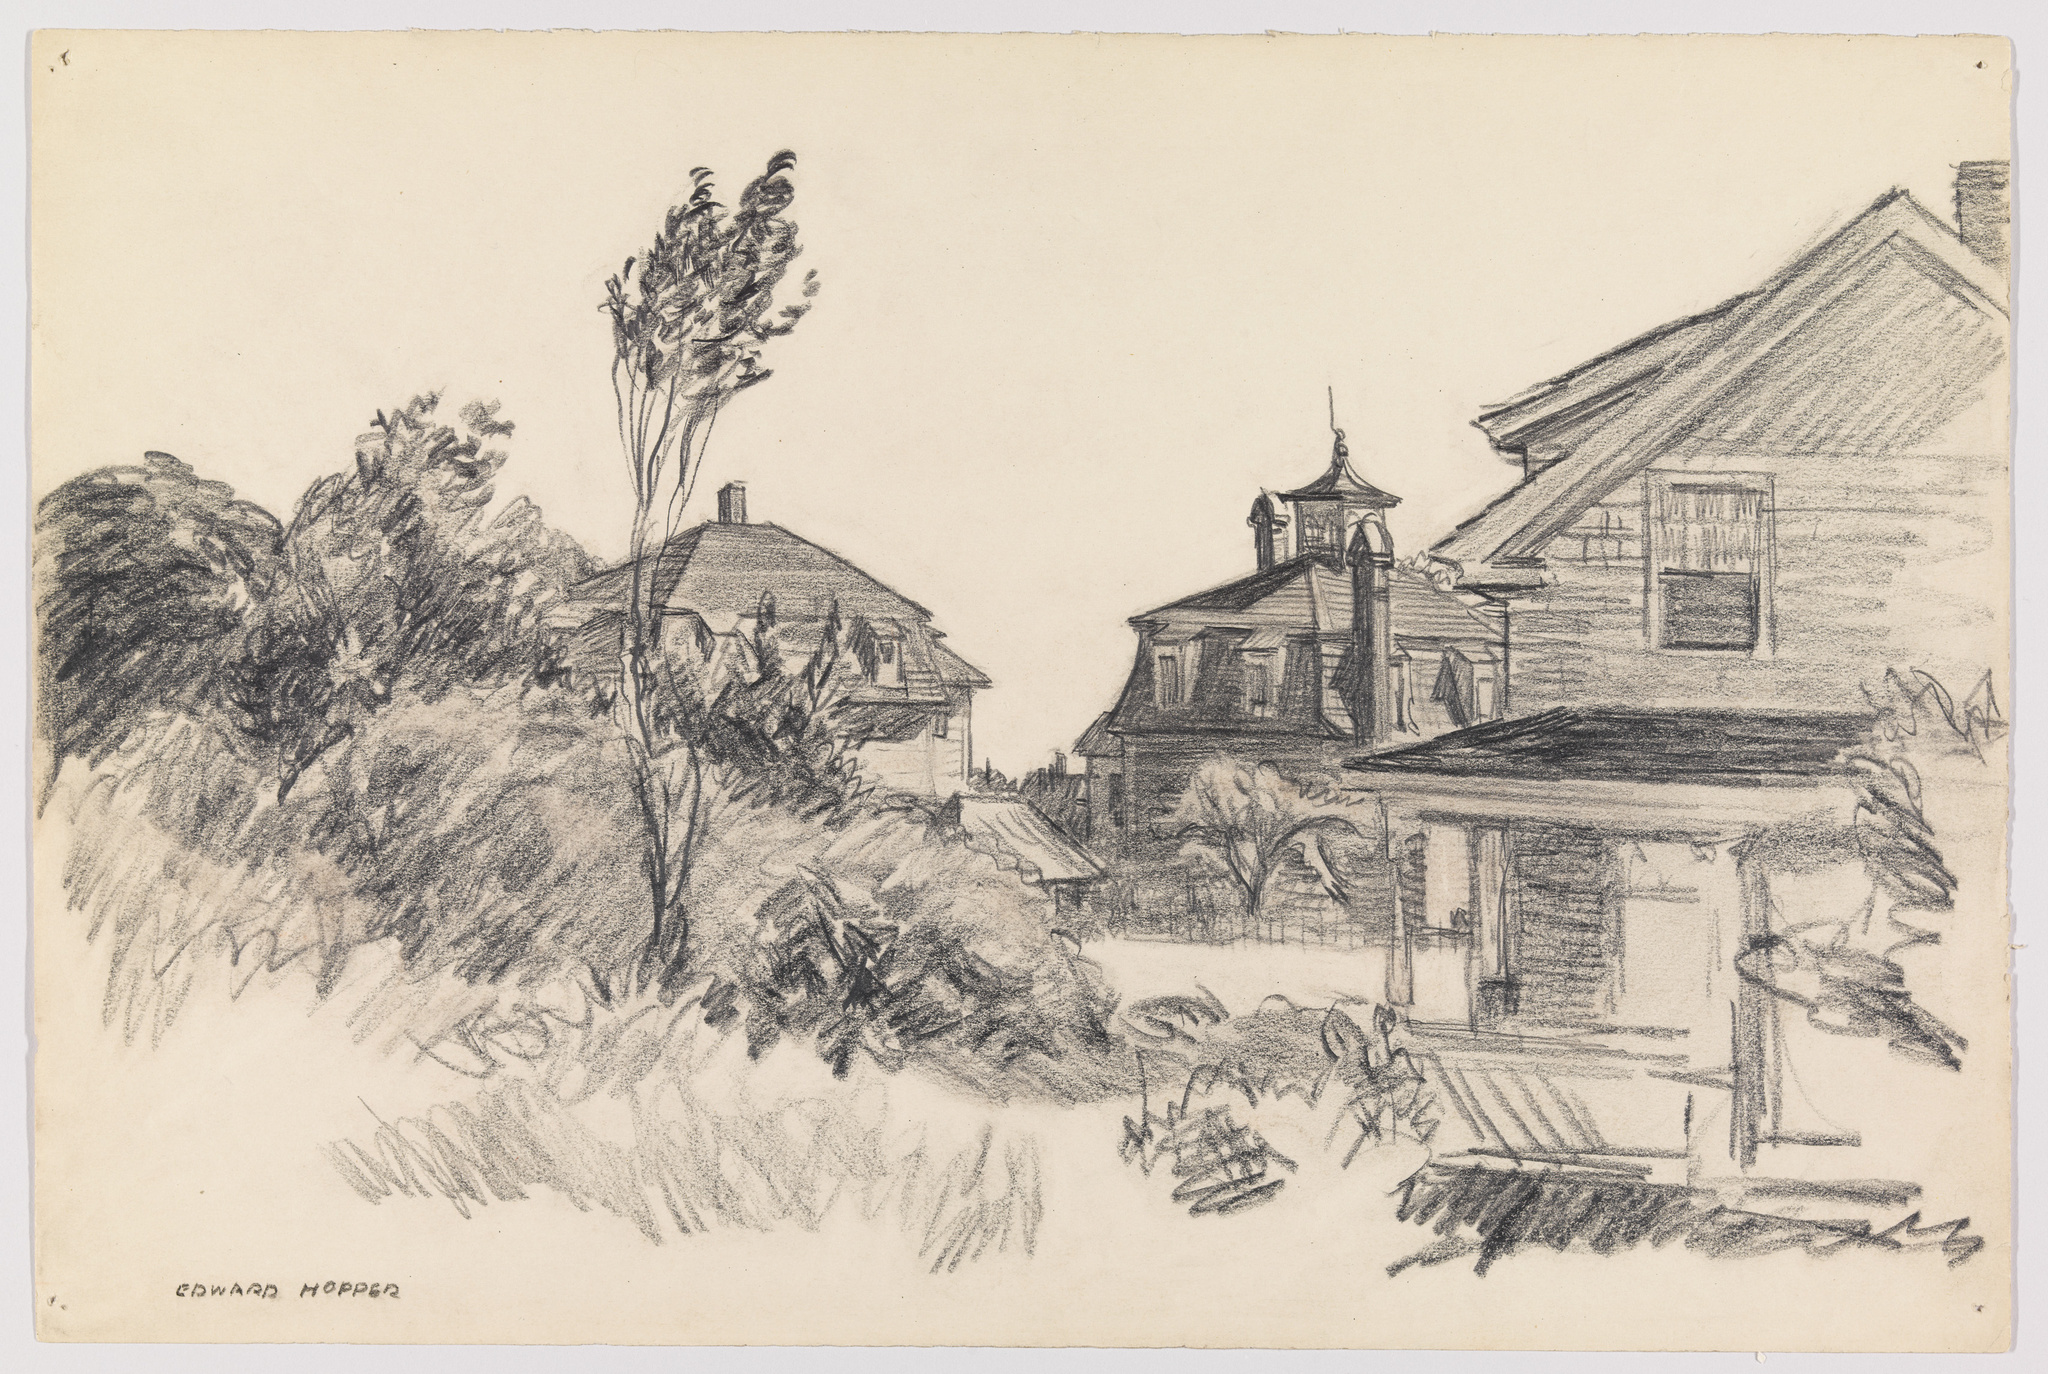 Edward Hopper | (Study of Landscape with Houses) | Whitney Museum of ...